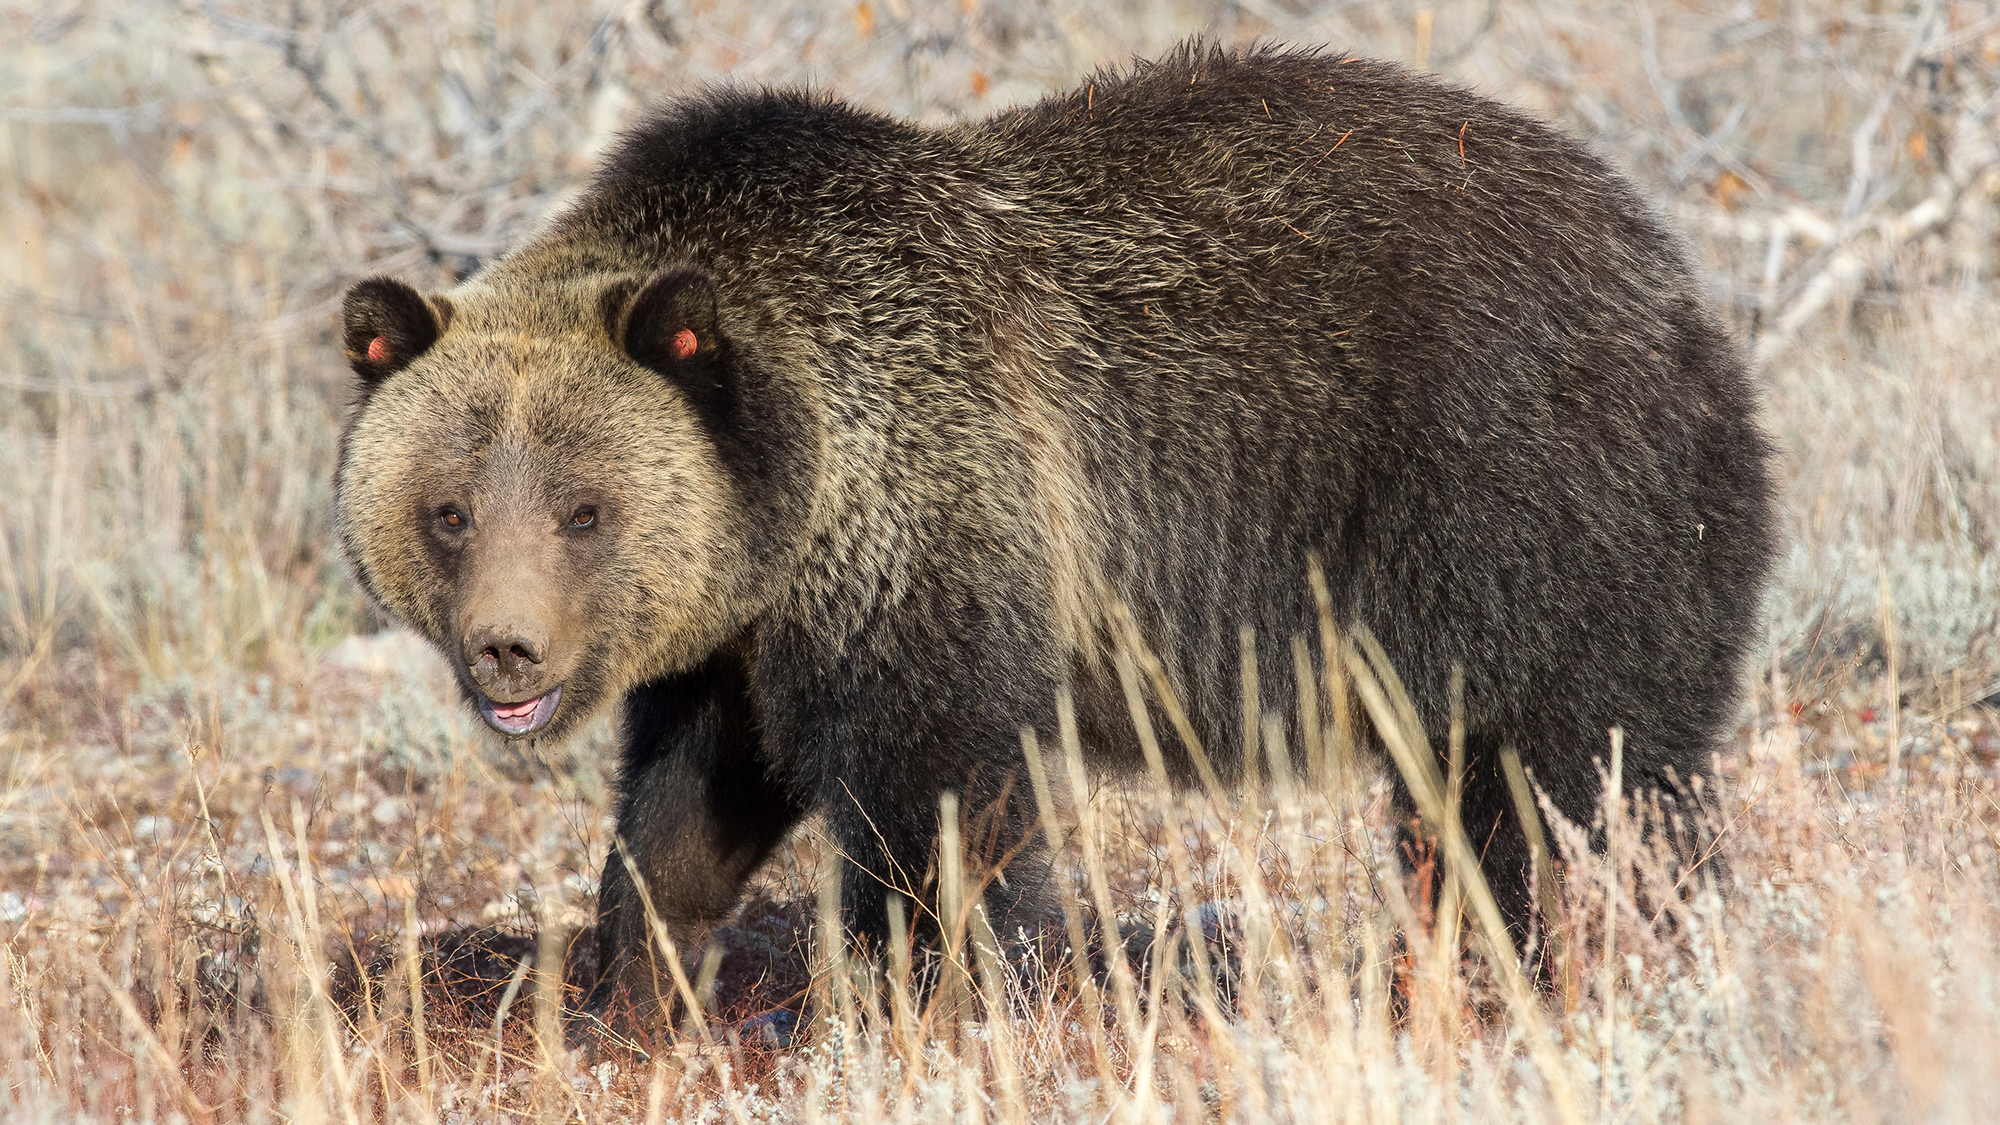 grizzly with ear tags in meadow